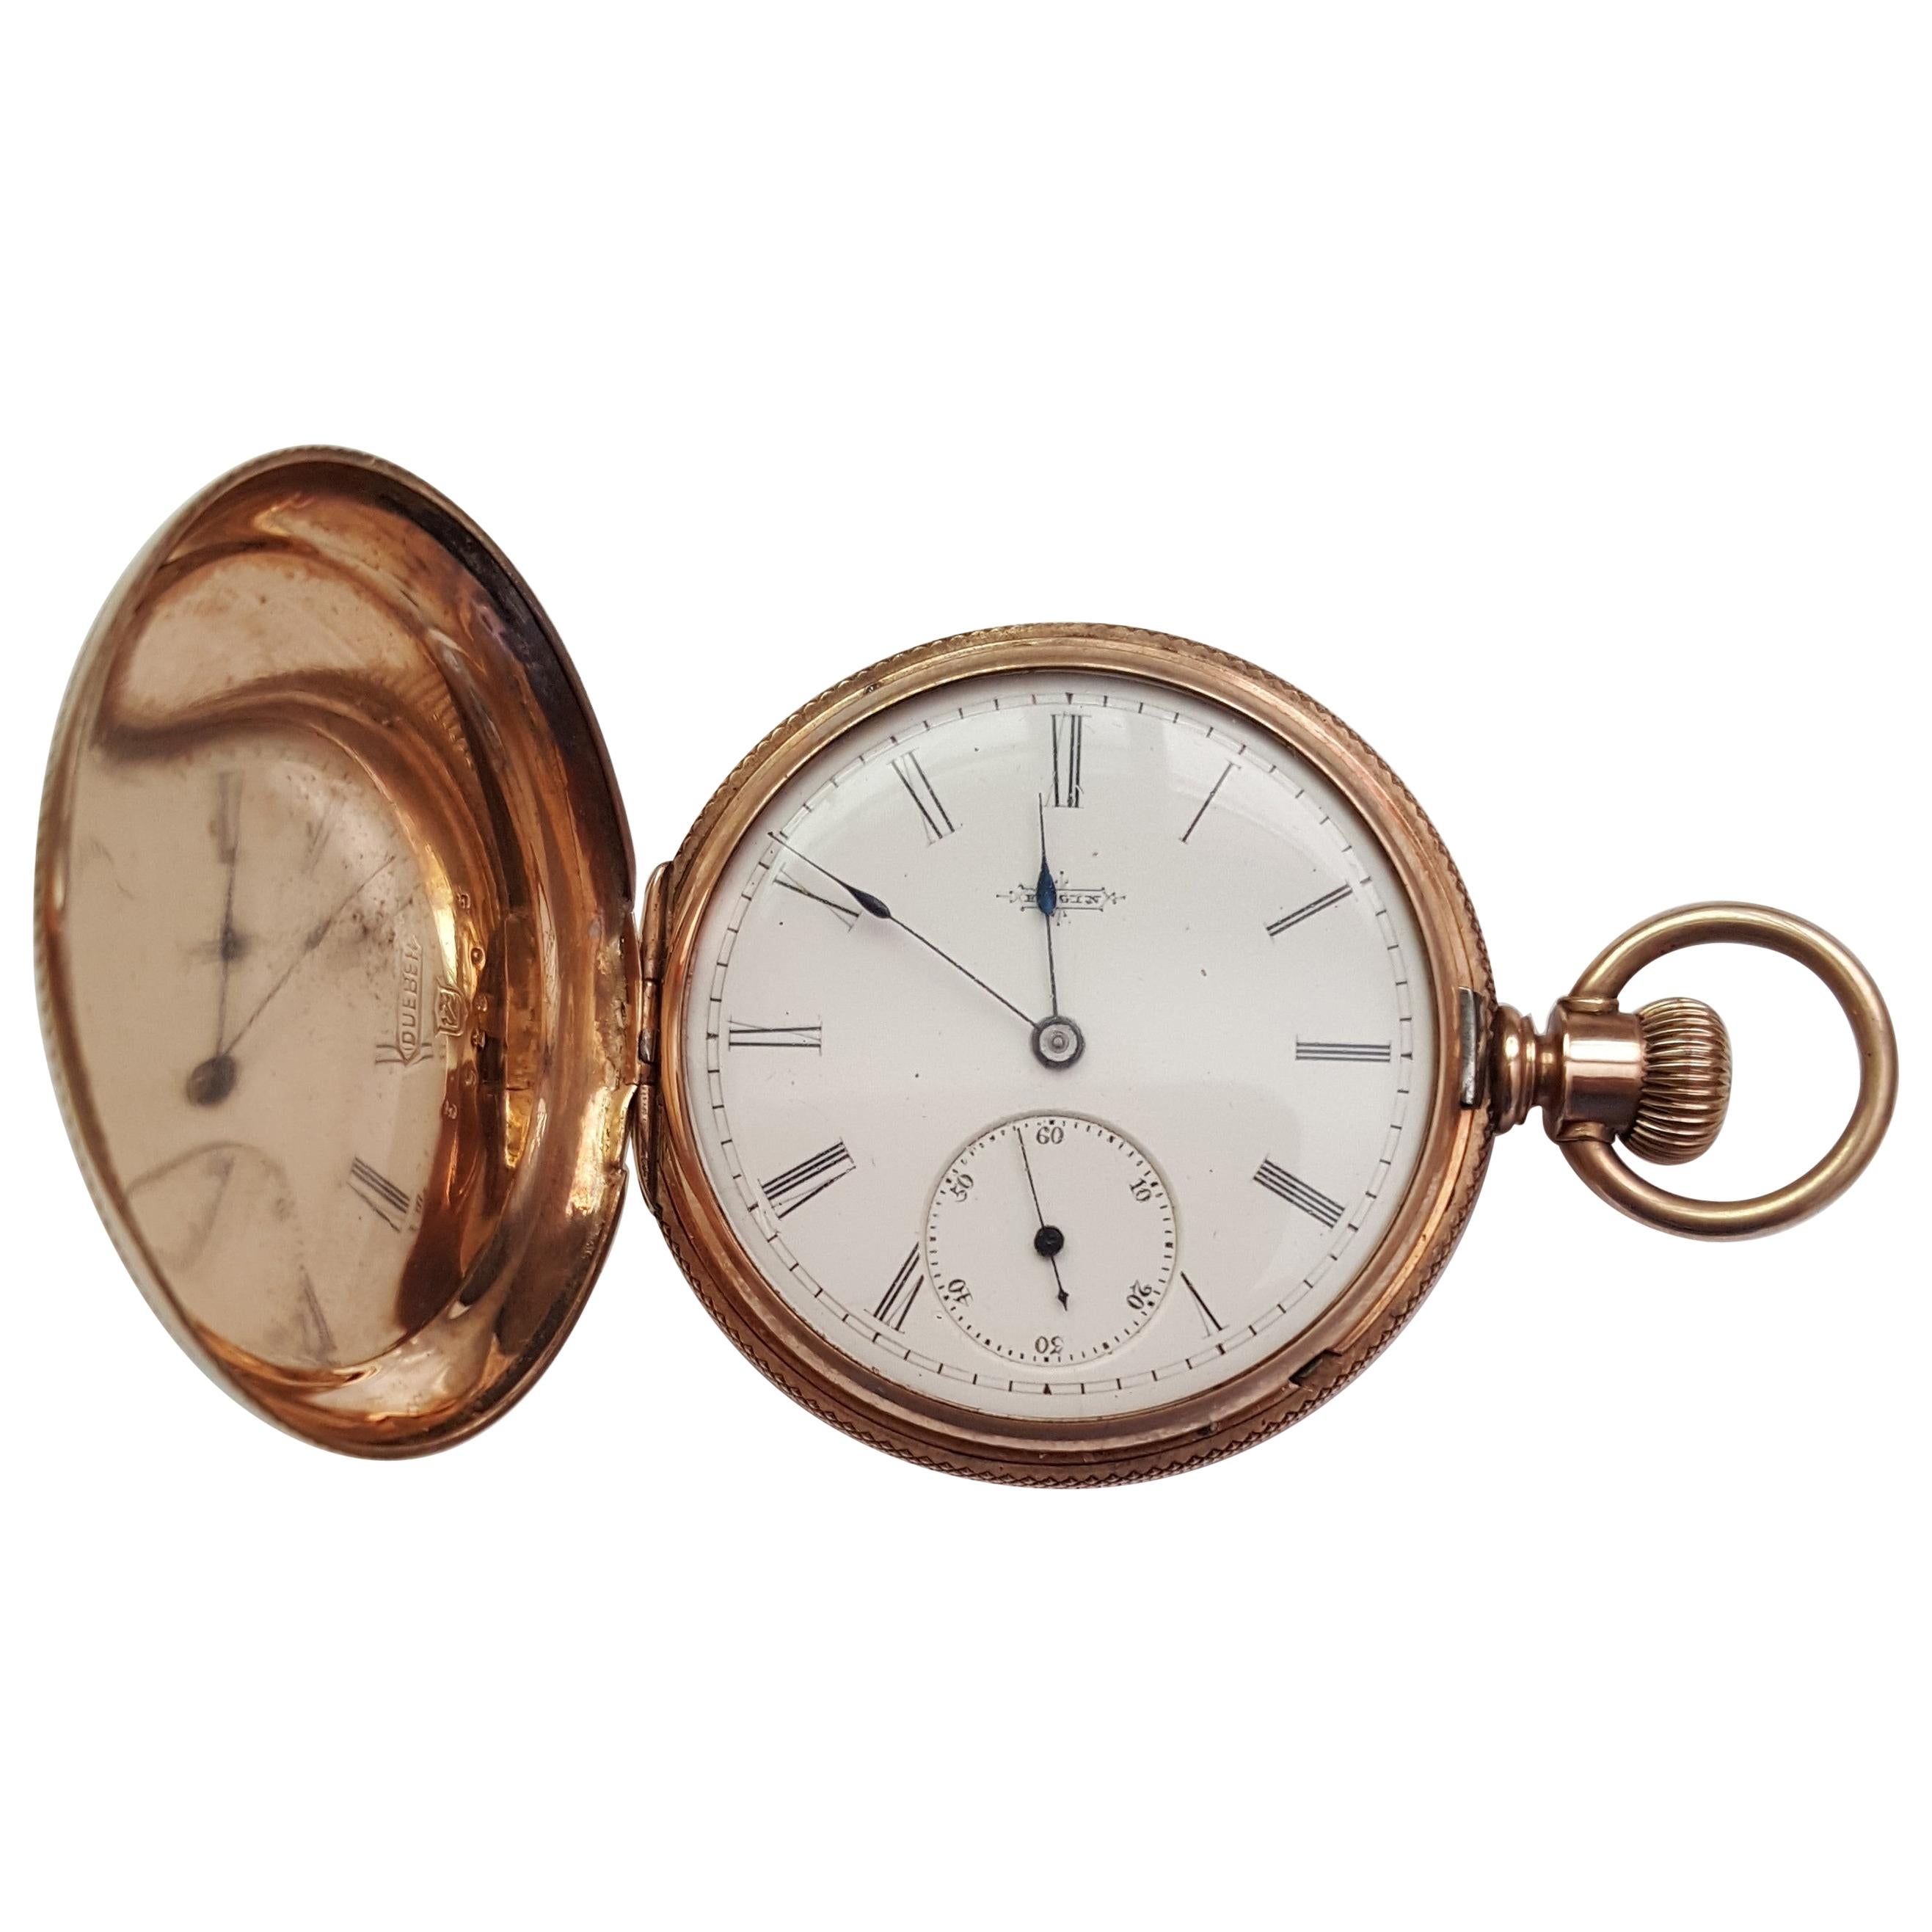 Elgin National Watch Co Pocket Watch - 2 For Sale on 1stDibs | elgin  national watch company